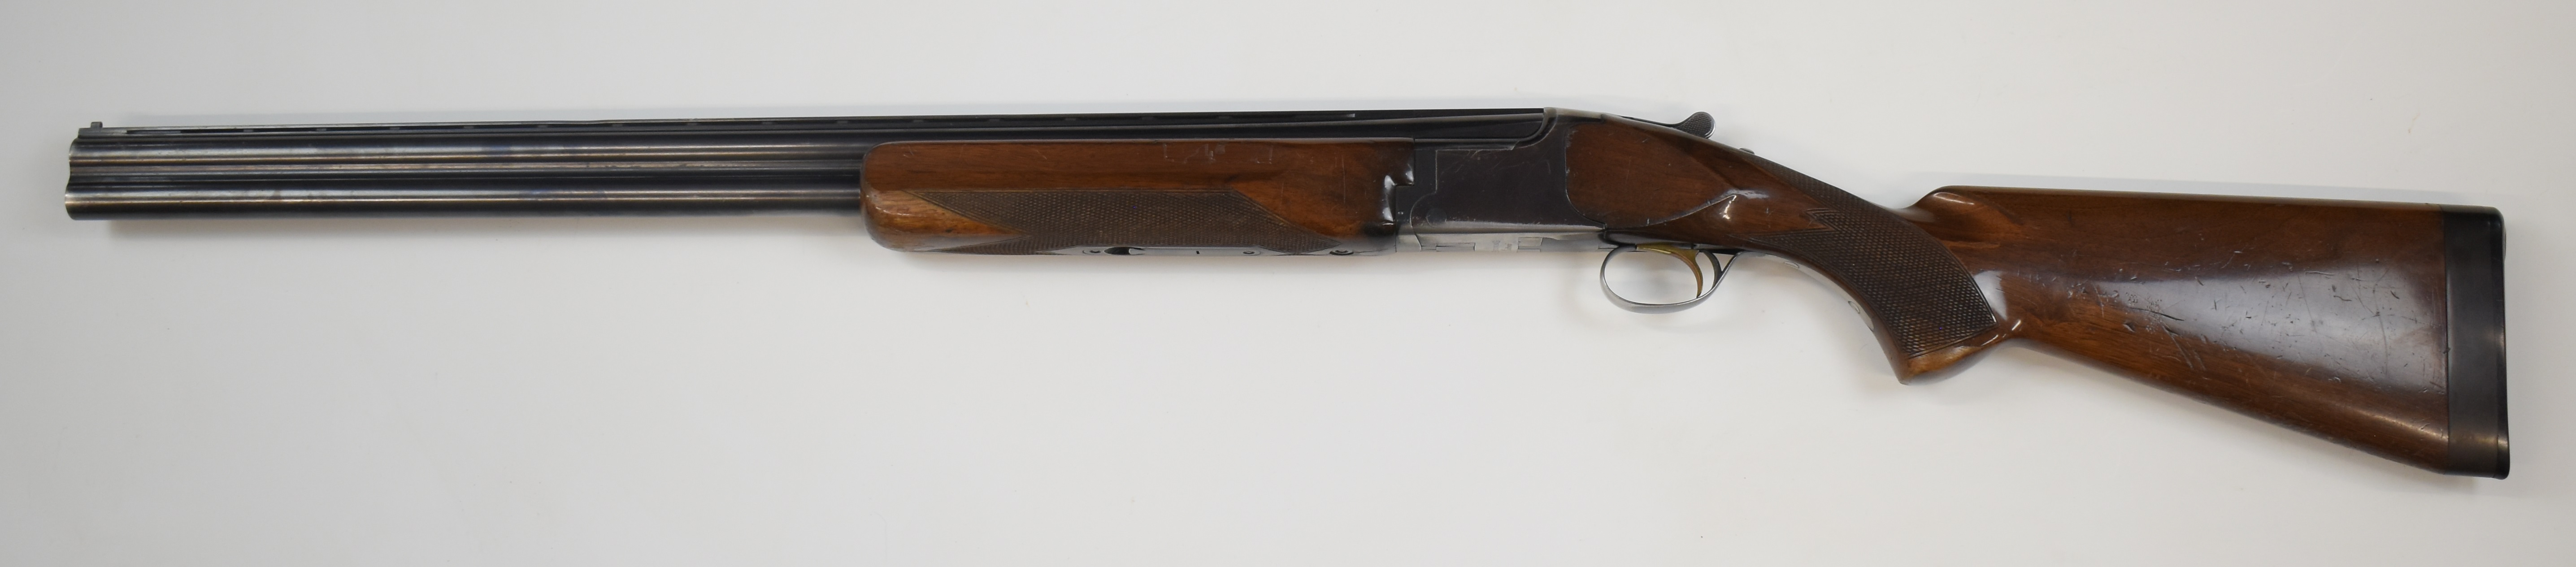 Browning Citori 12 bore over and under ejector shotgun with named underside, chequered semi-pistol - Image 6 of 10